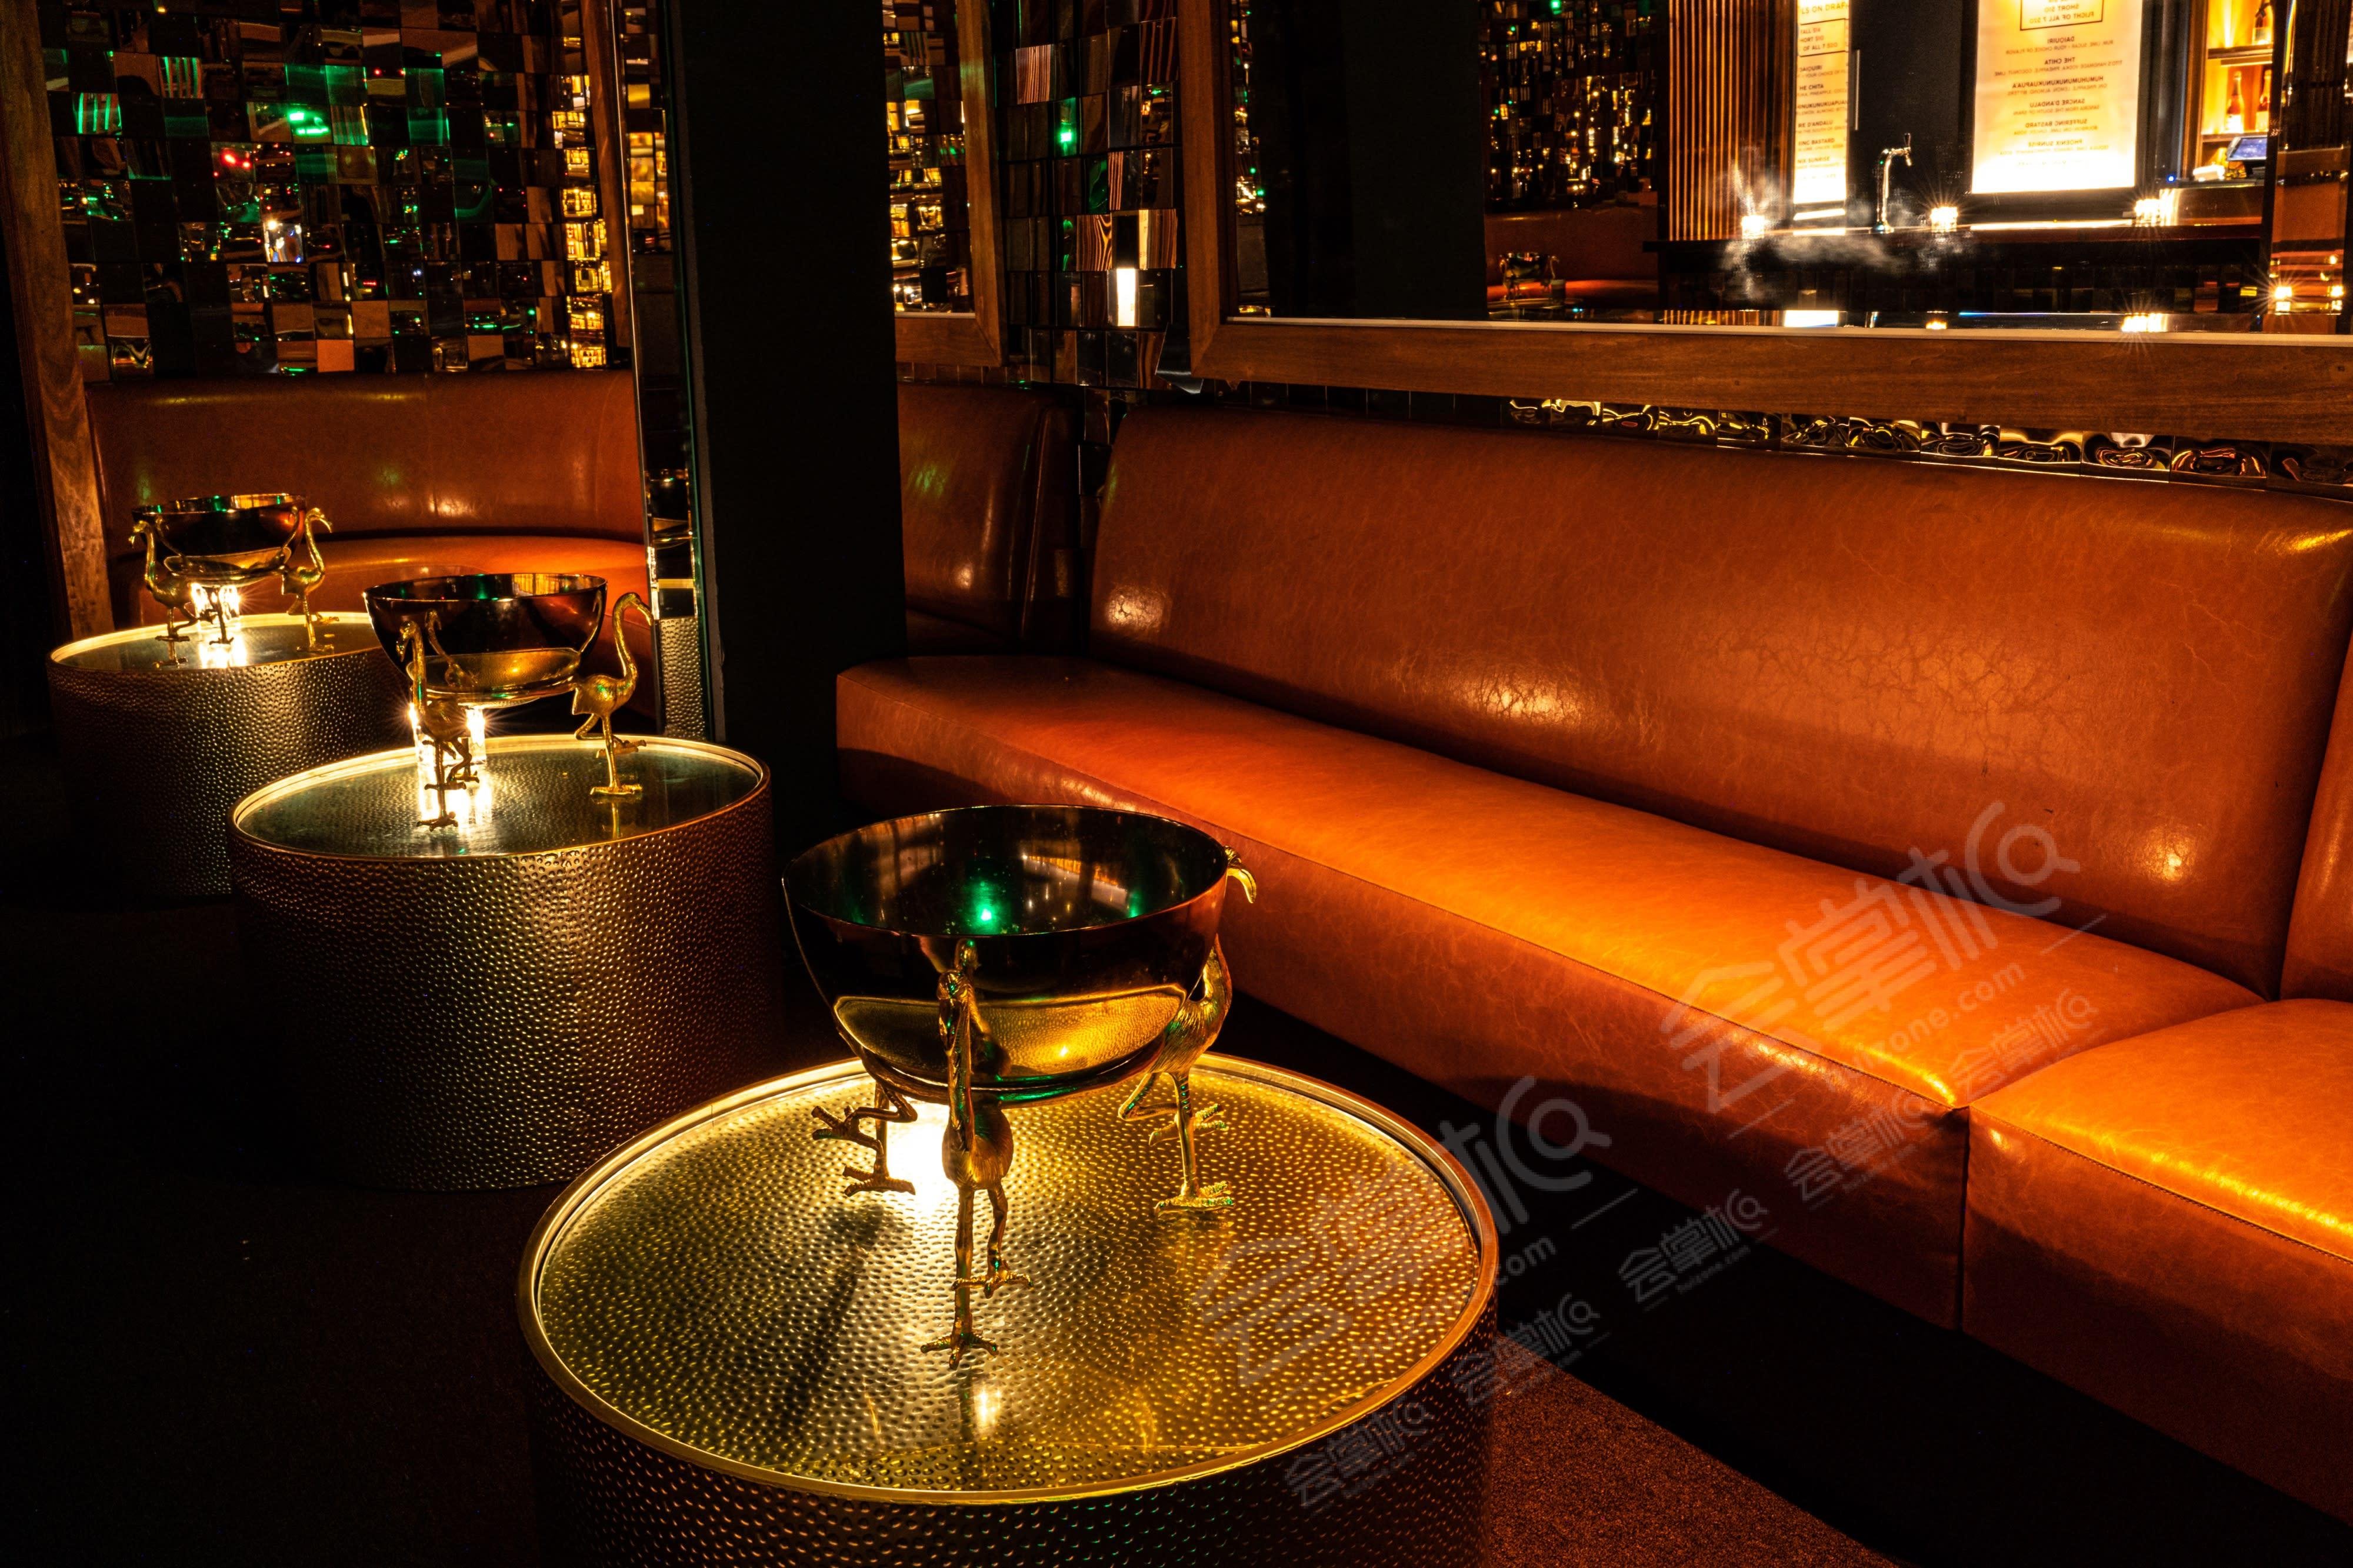 Sophisticated, Stylish Studio54- inspired bar & dance club with light-up dance floor in Downtown LA